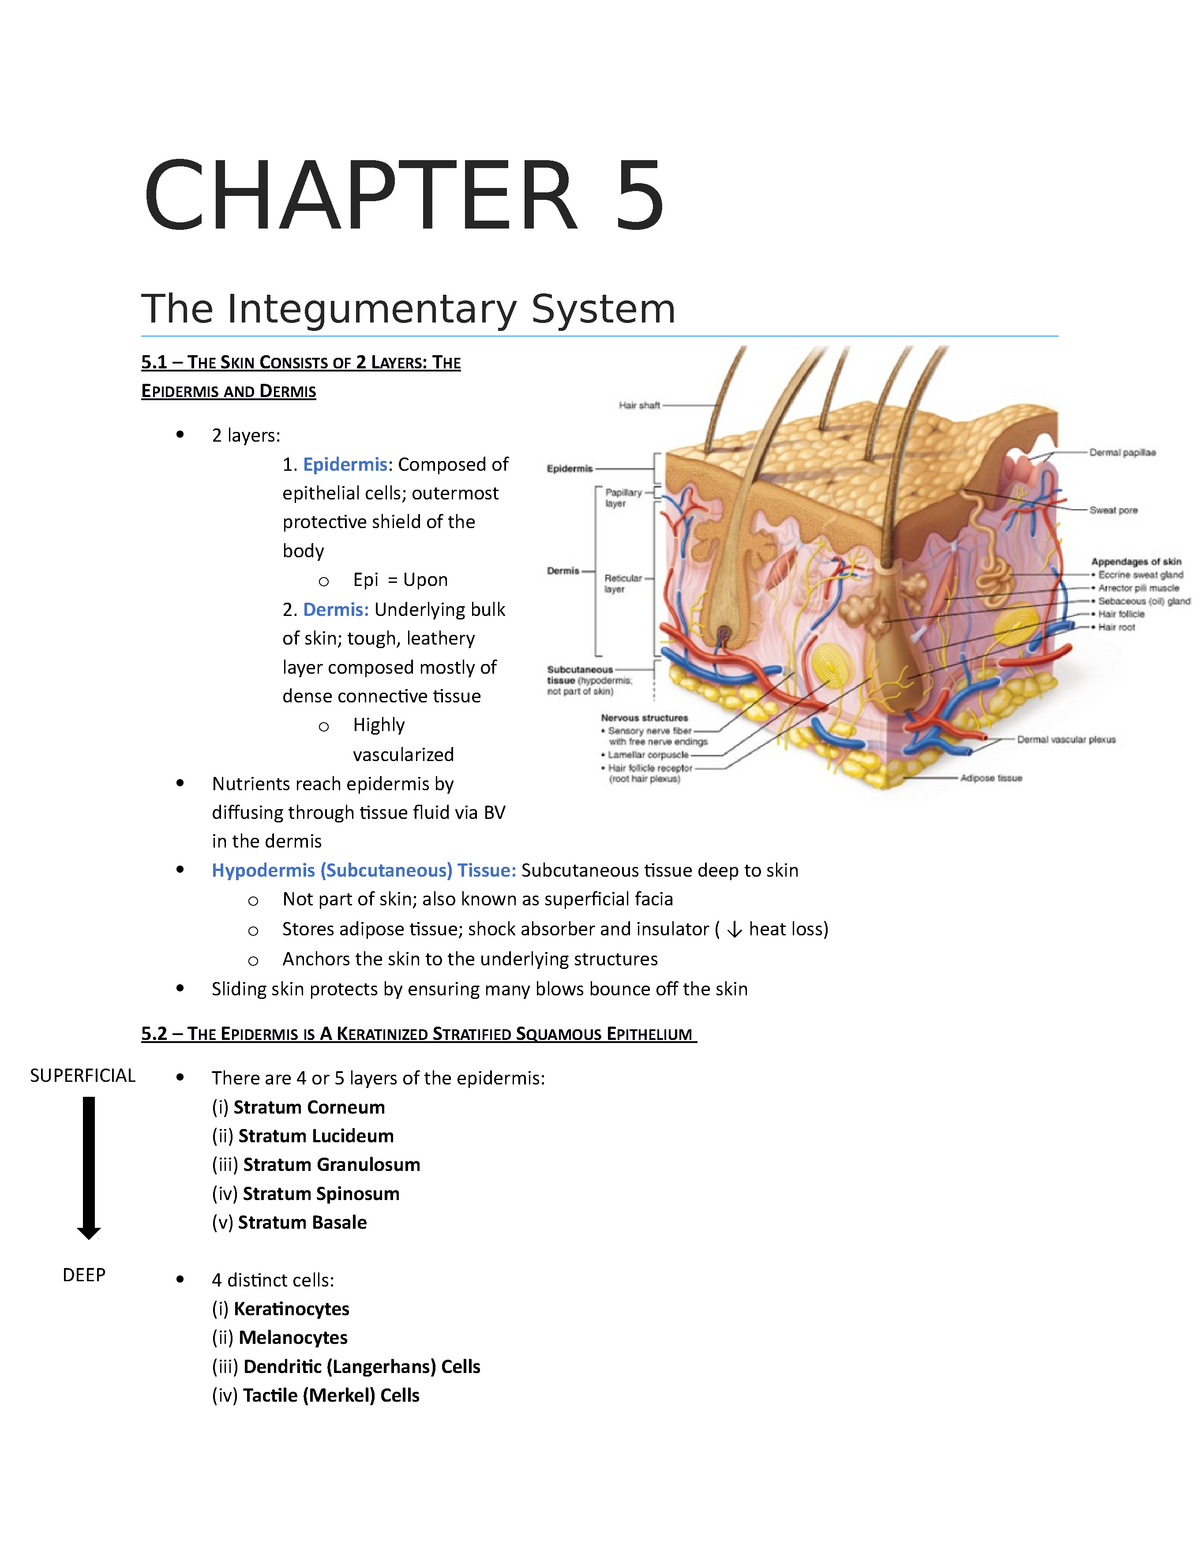 Chapter 5 Integumentary System CHAPTER 5 The Integumentary System 5 THE SKIN CONSISTS OF 2